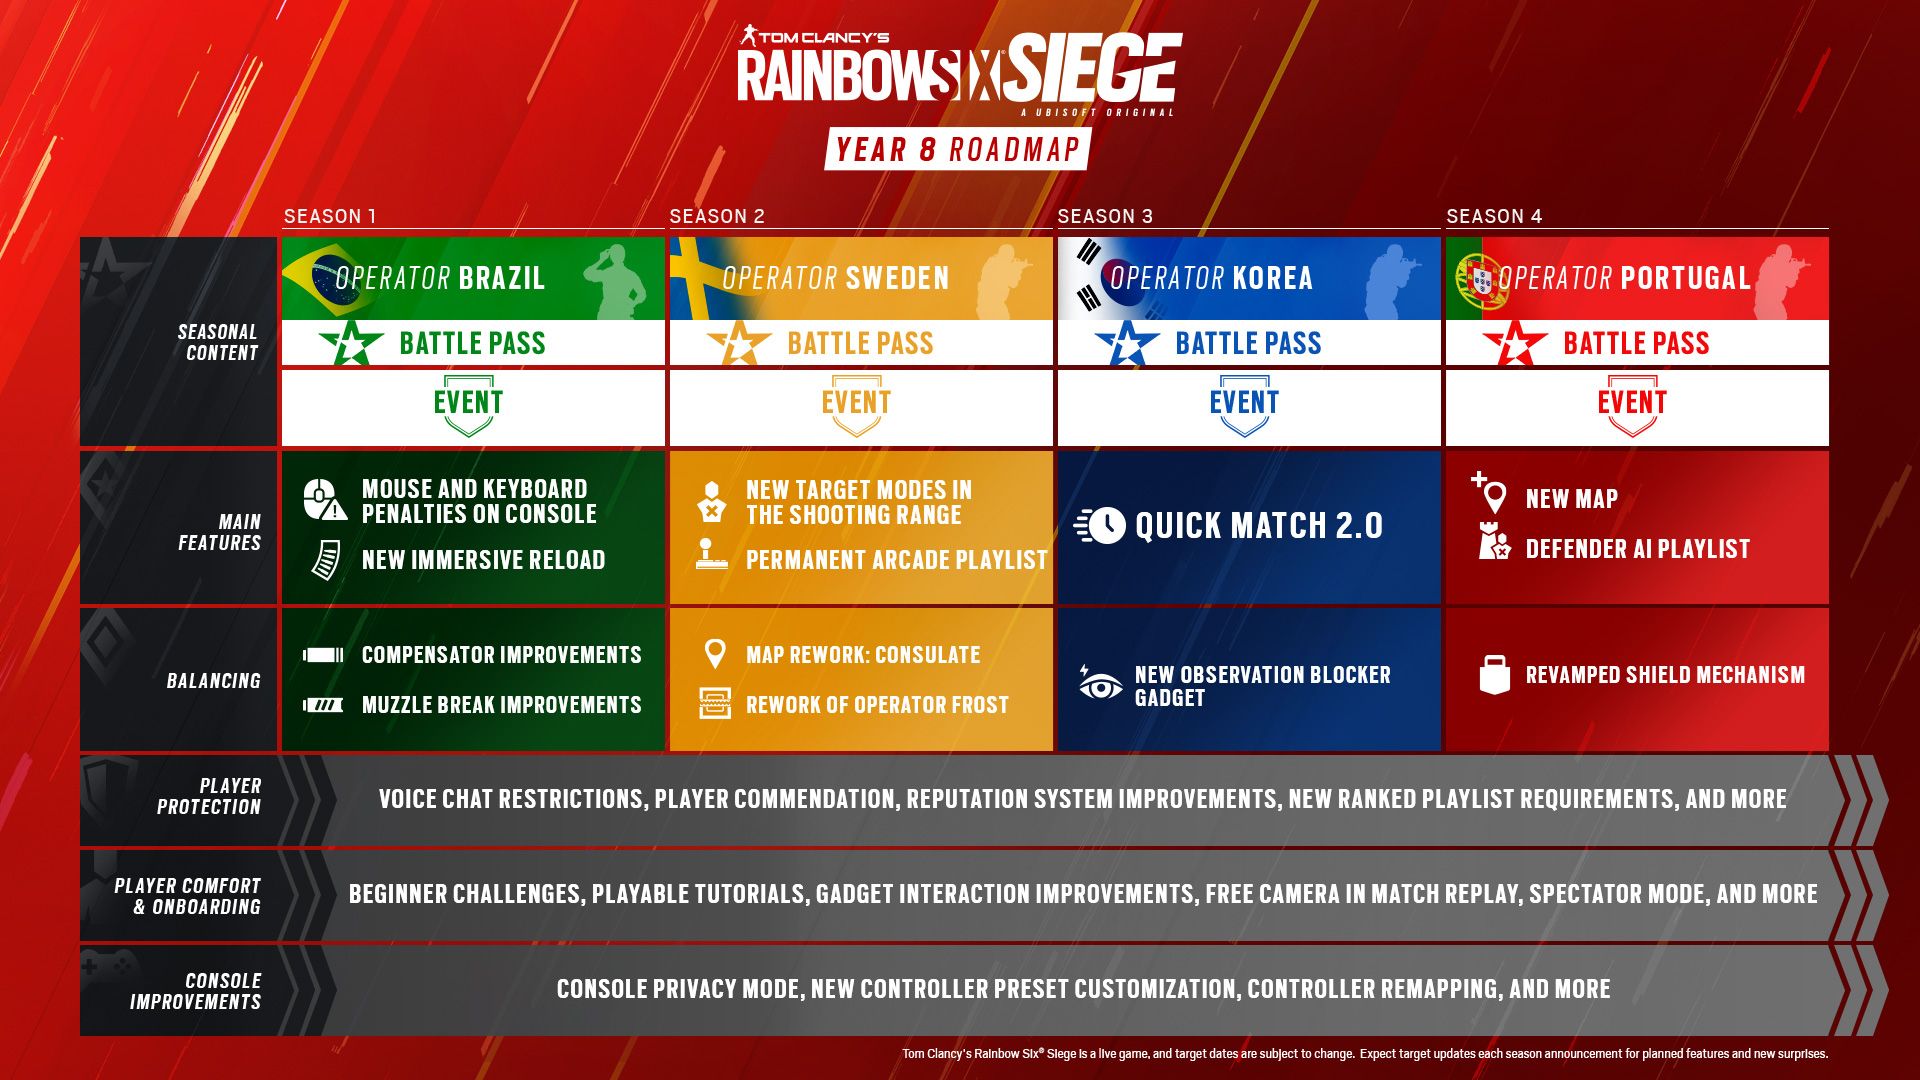 All you need to know about the future of Rainbow Six Siege in Year 8